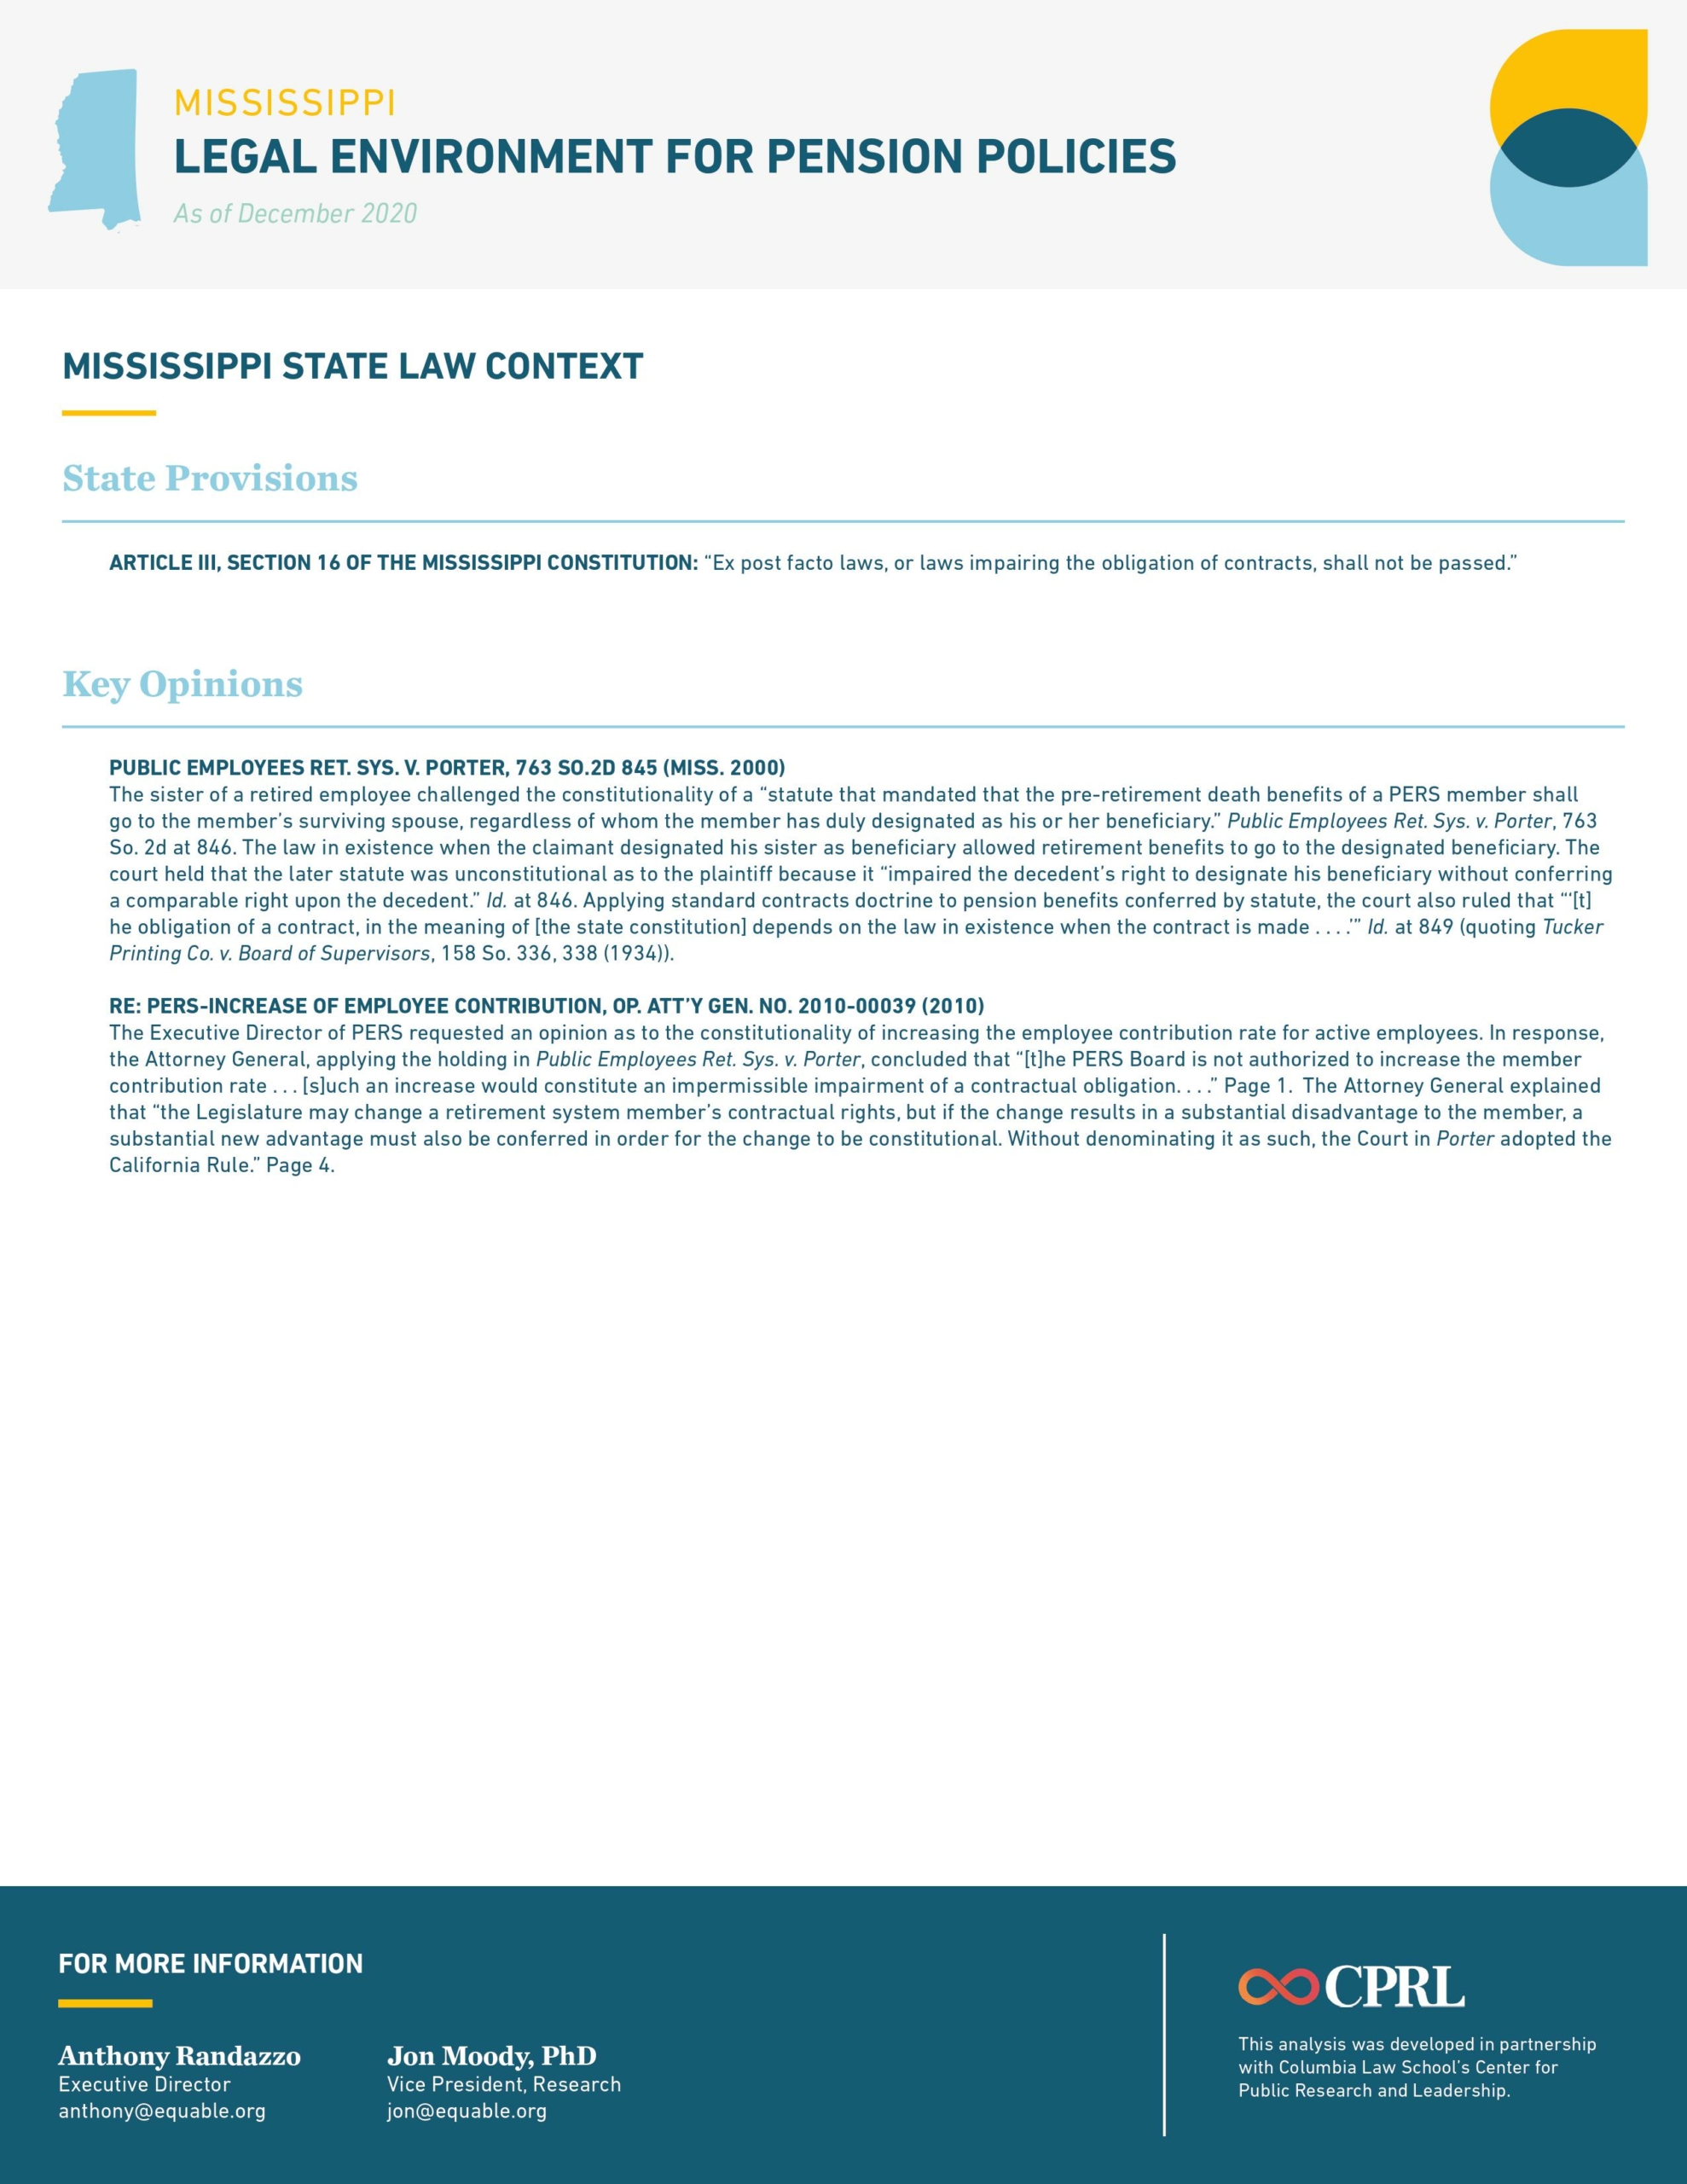 Mississippi Pension Laws Infographic - Page 2